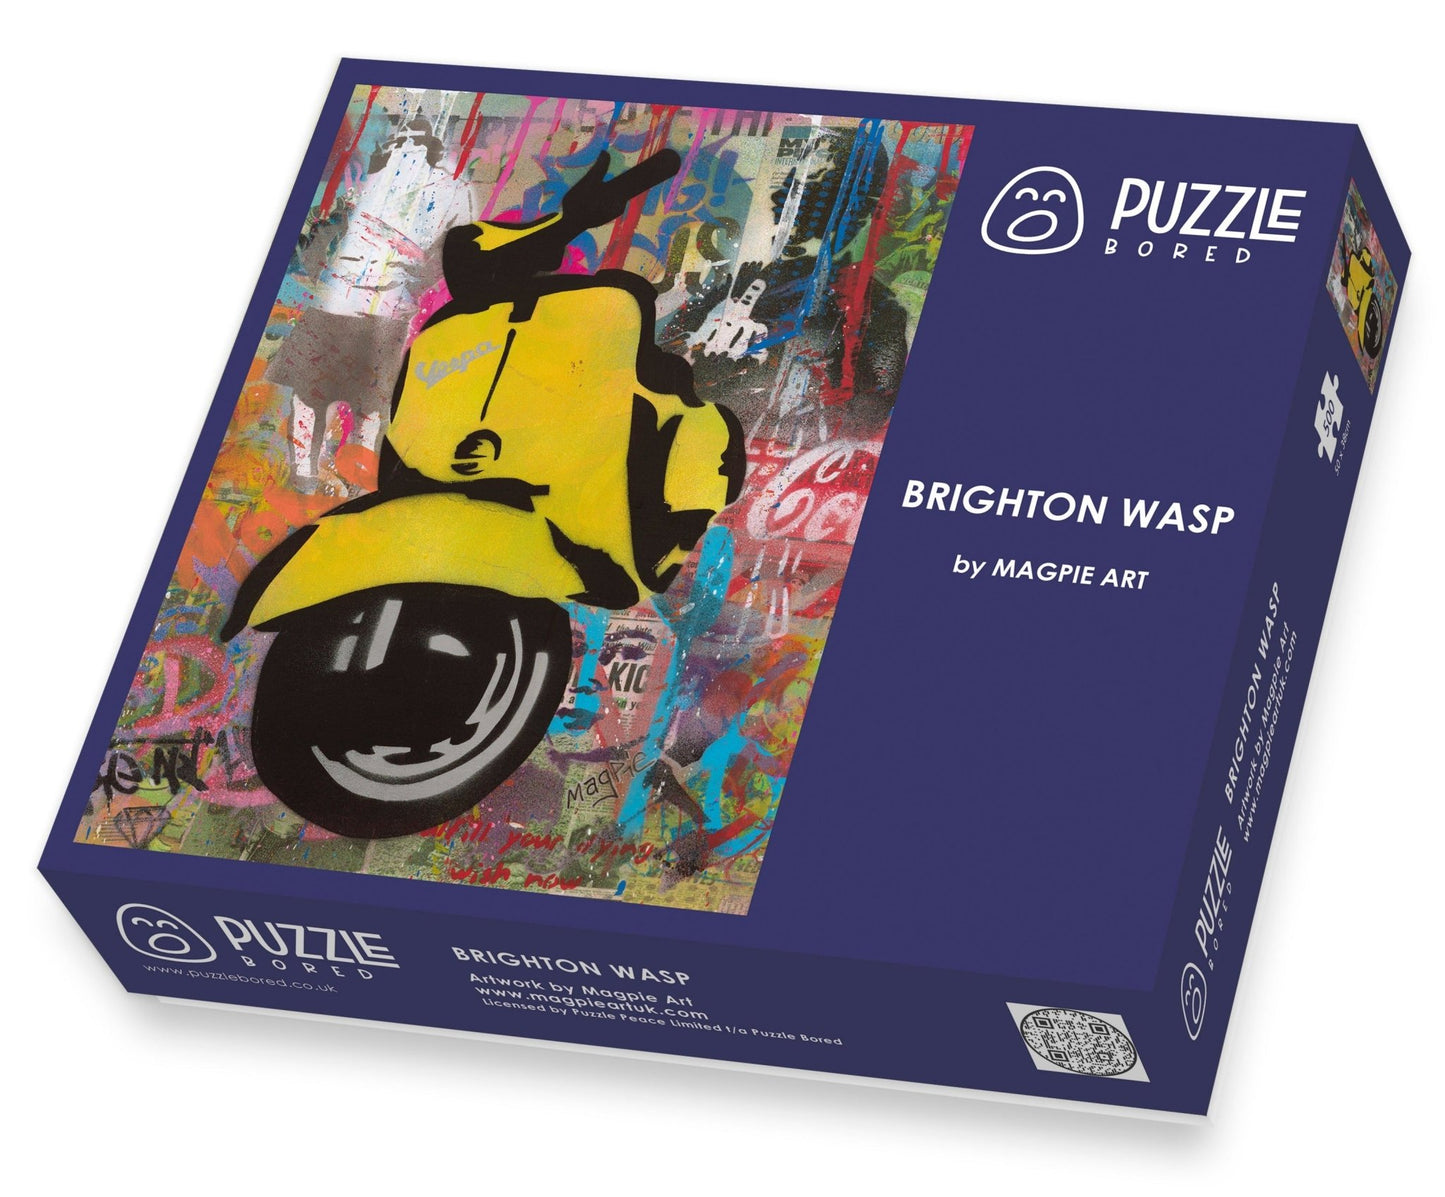 Brighton Wasp by Magpie Art - Puzzle Bored